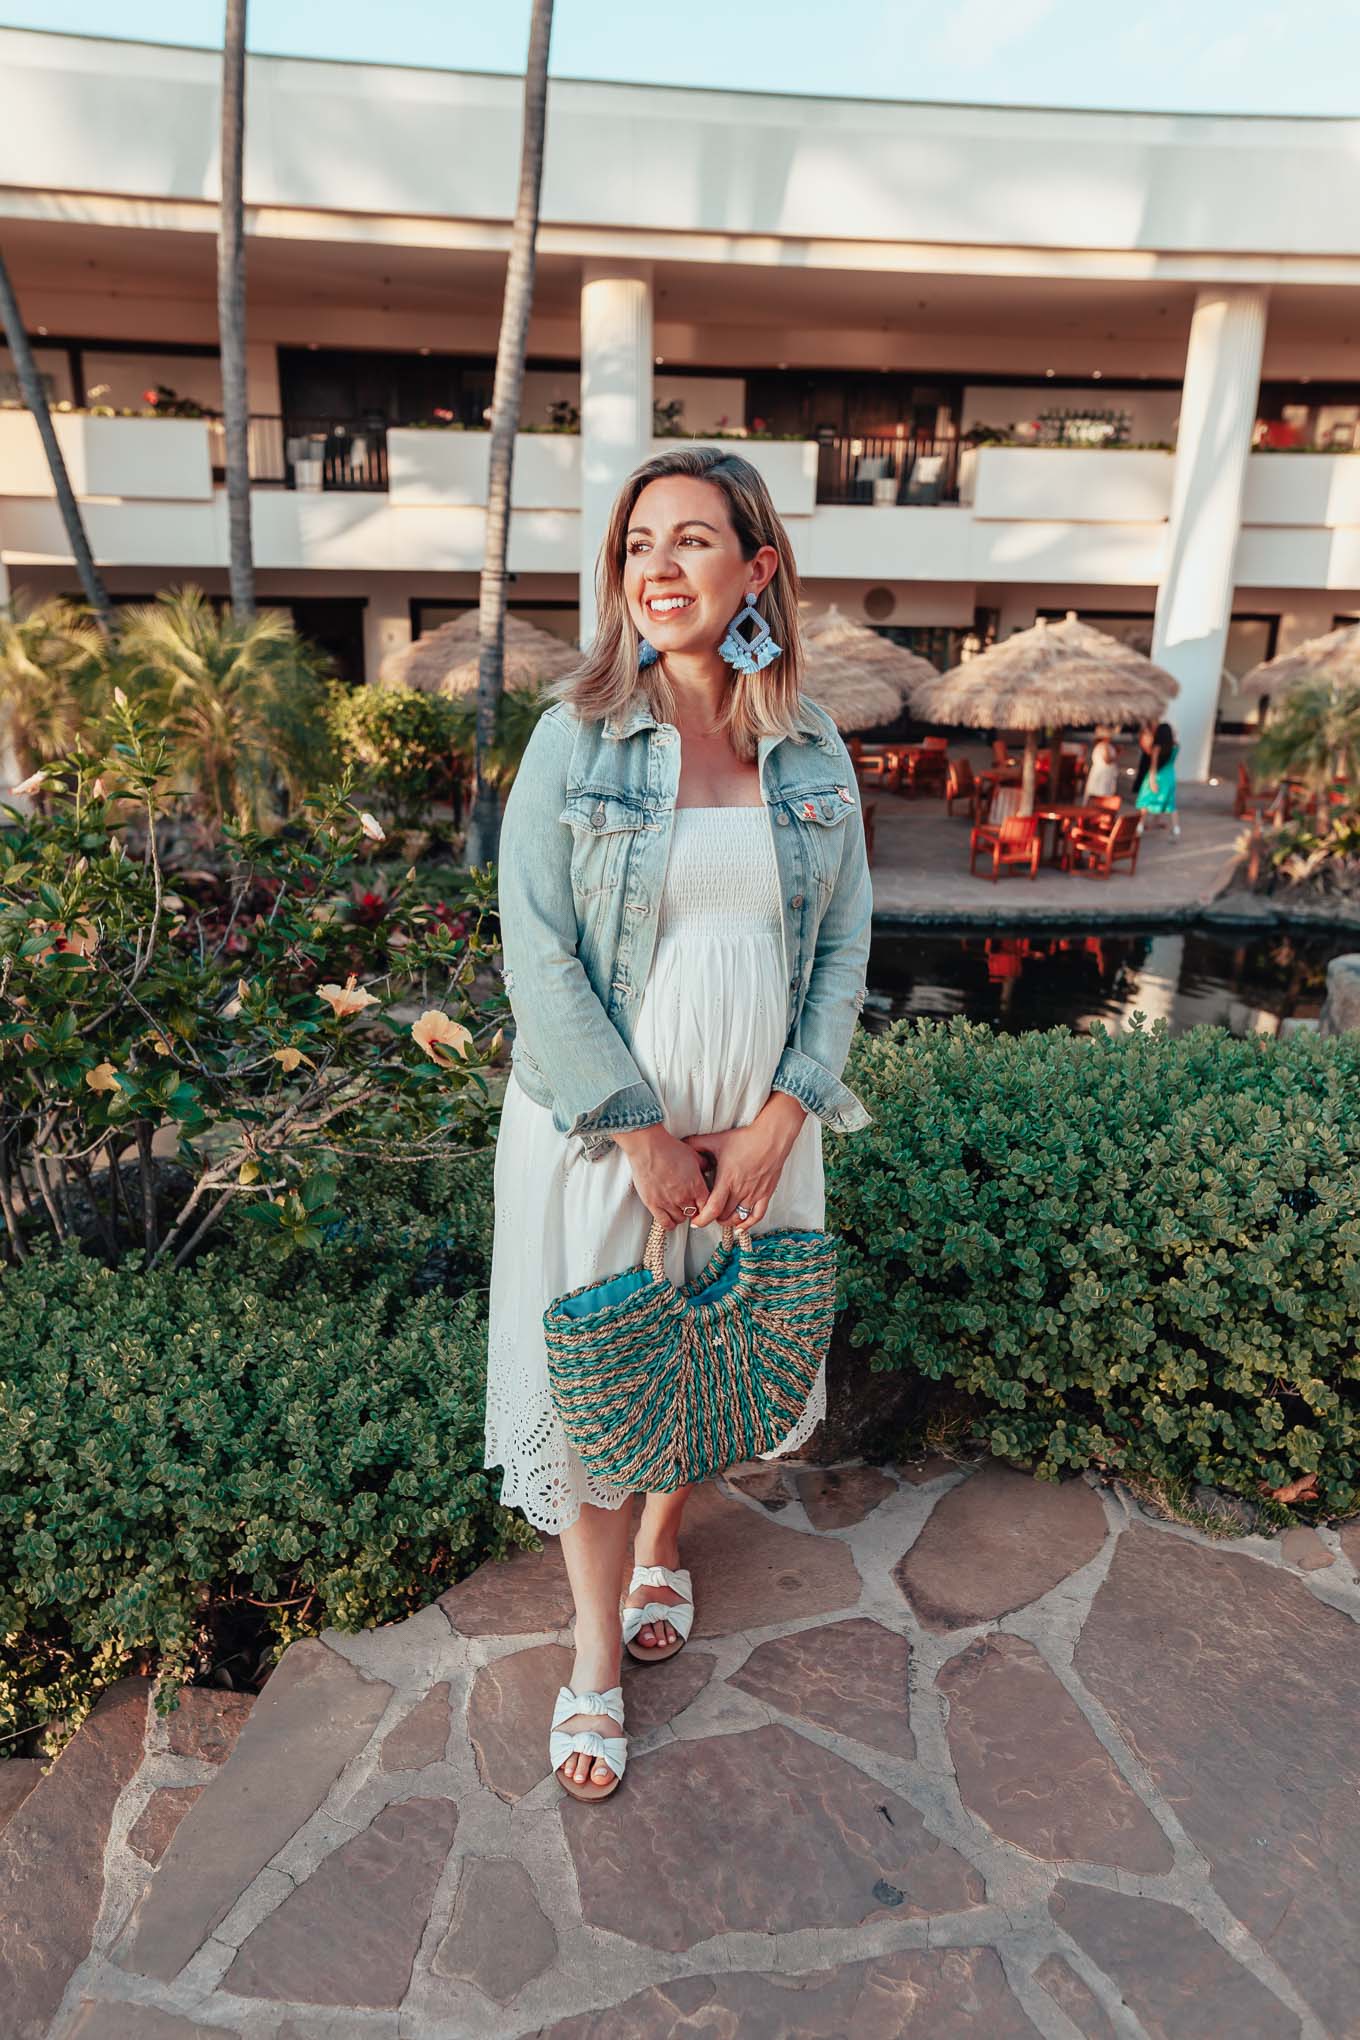 Shopbop sale maternity favorites featured by top US fashion blog, Glass of Glam: image of a woman wearing an Ingrid & Isabel dress, Splendid flat sandals, Old Navy denim jacket, and BAUBLEBAR statement earrings